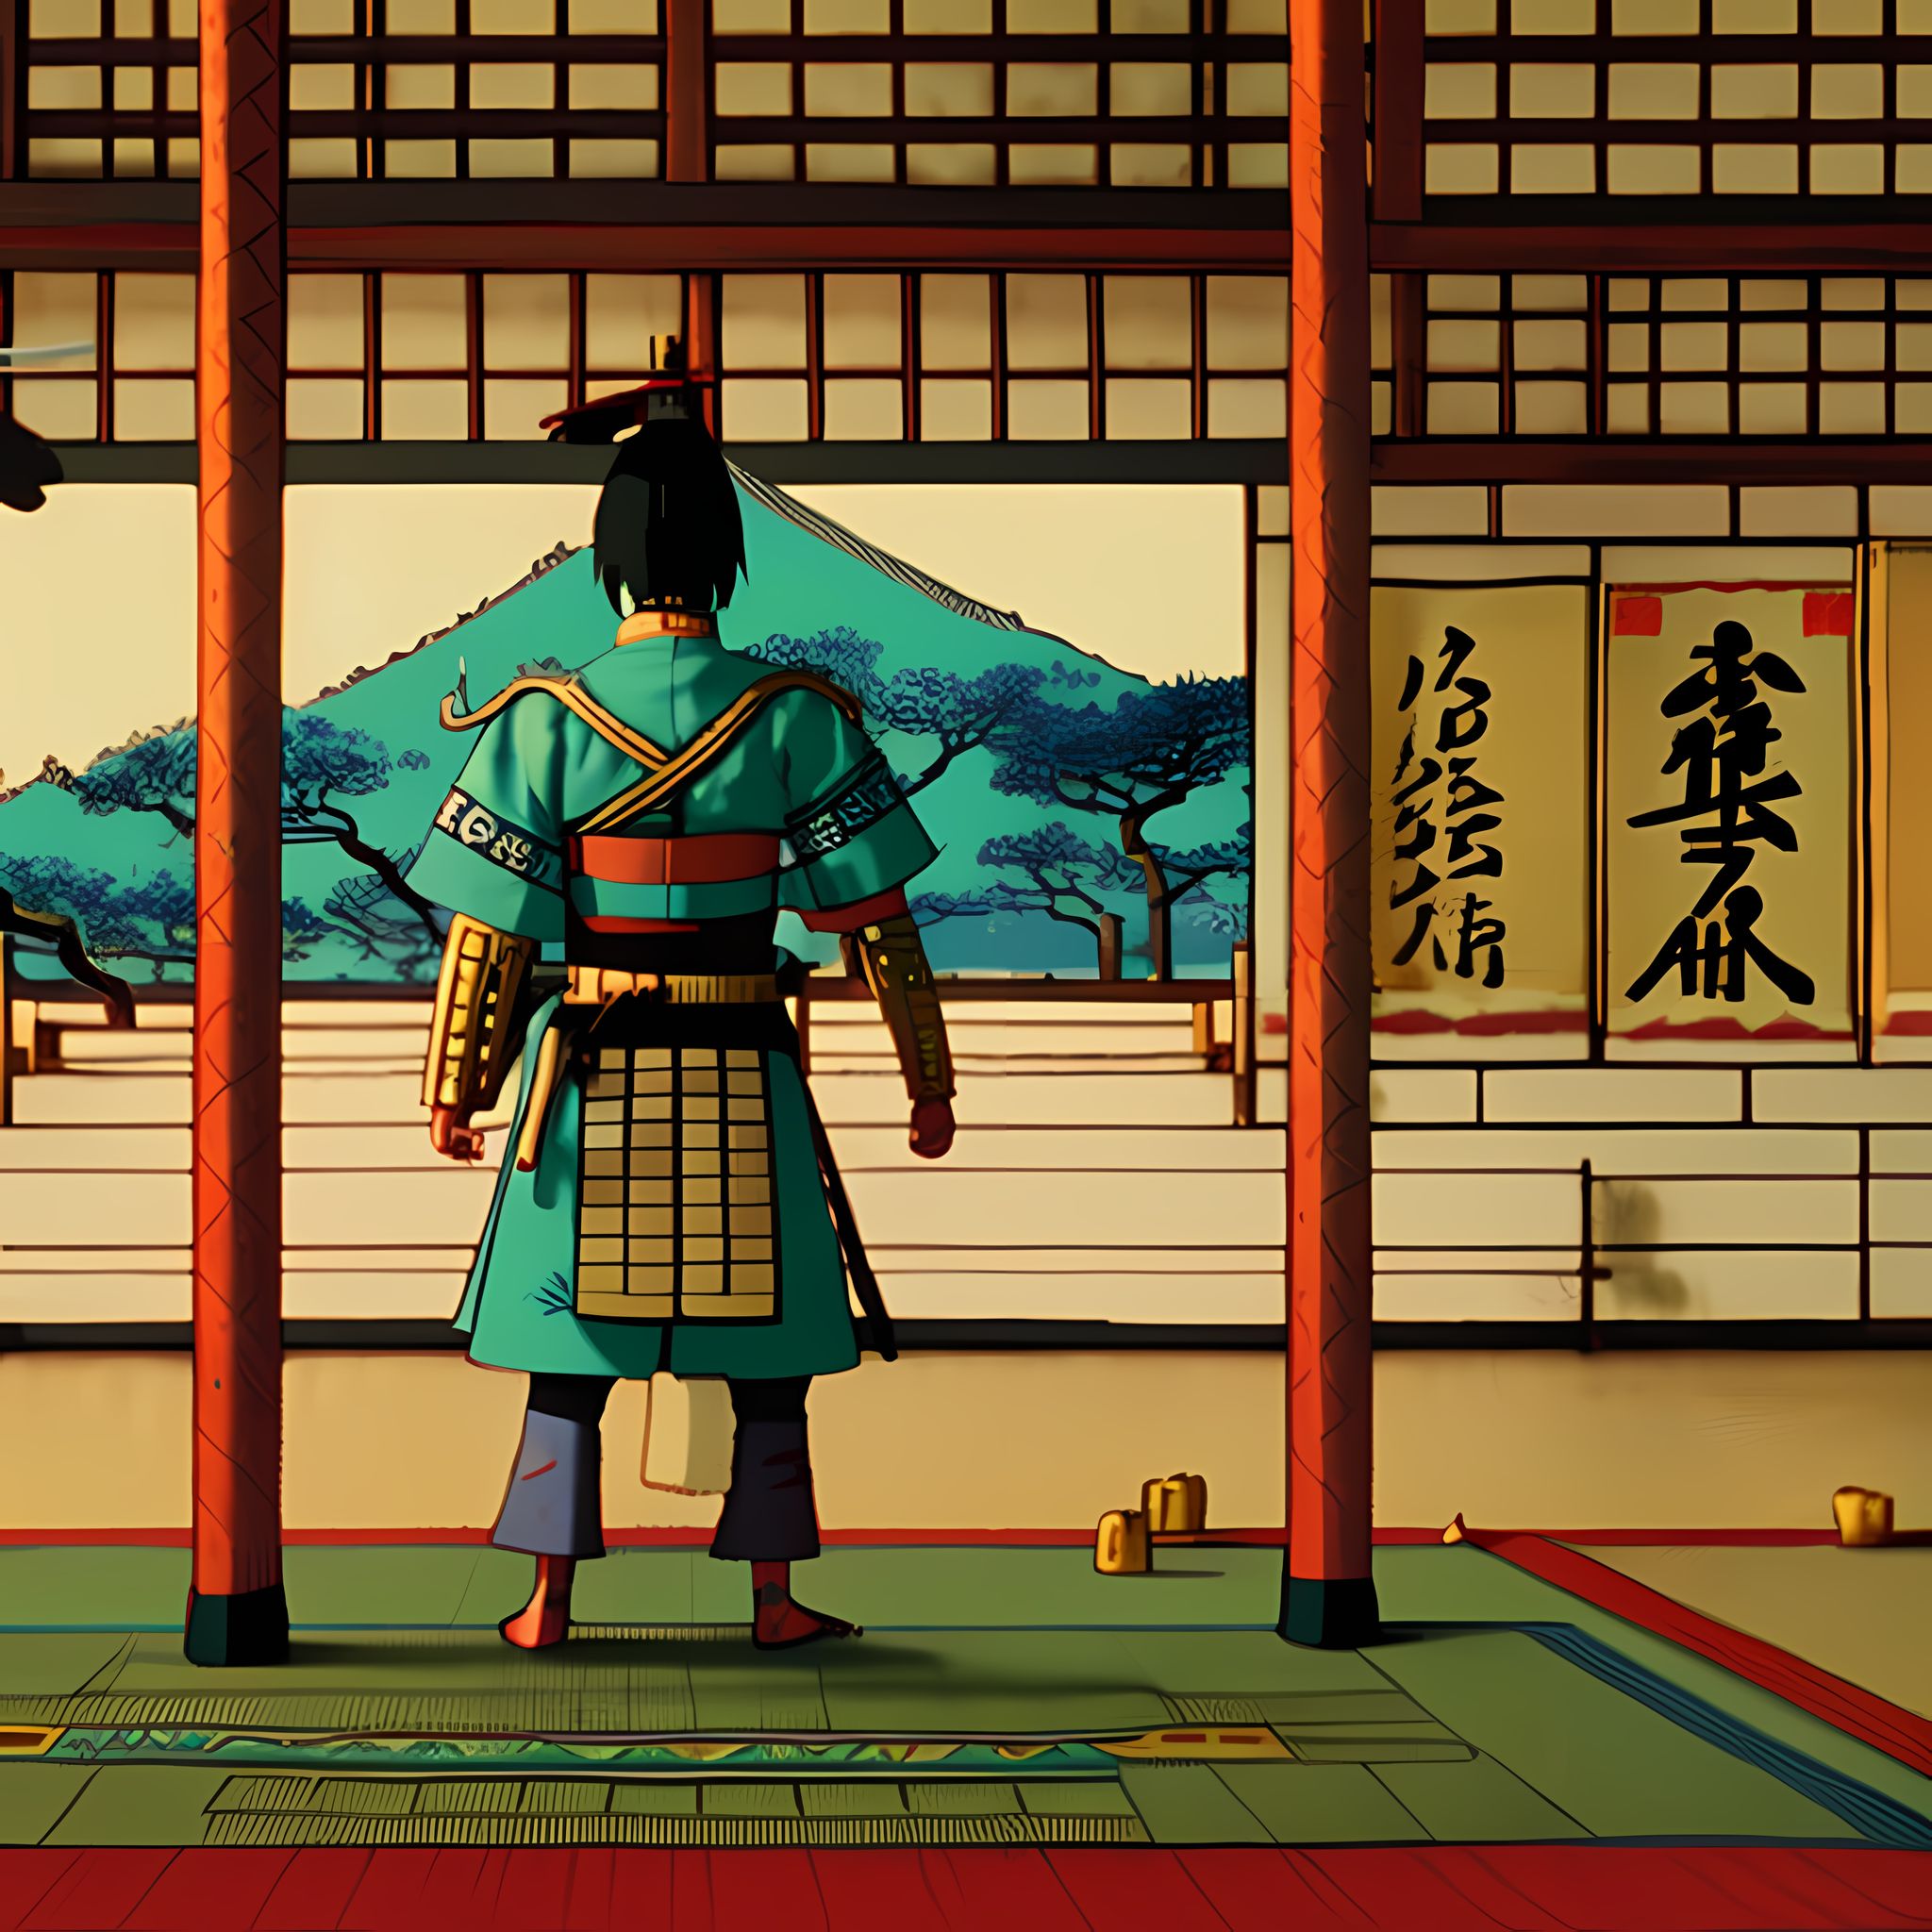 Shichinin-no-samurai-directed-by-Wes-Anderson-cinema-scene-high-res-photo-4k-lots-of-details-sh-q2sv